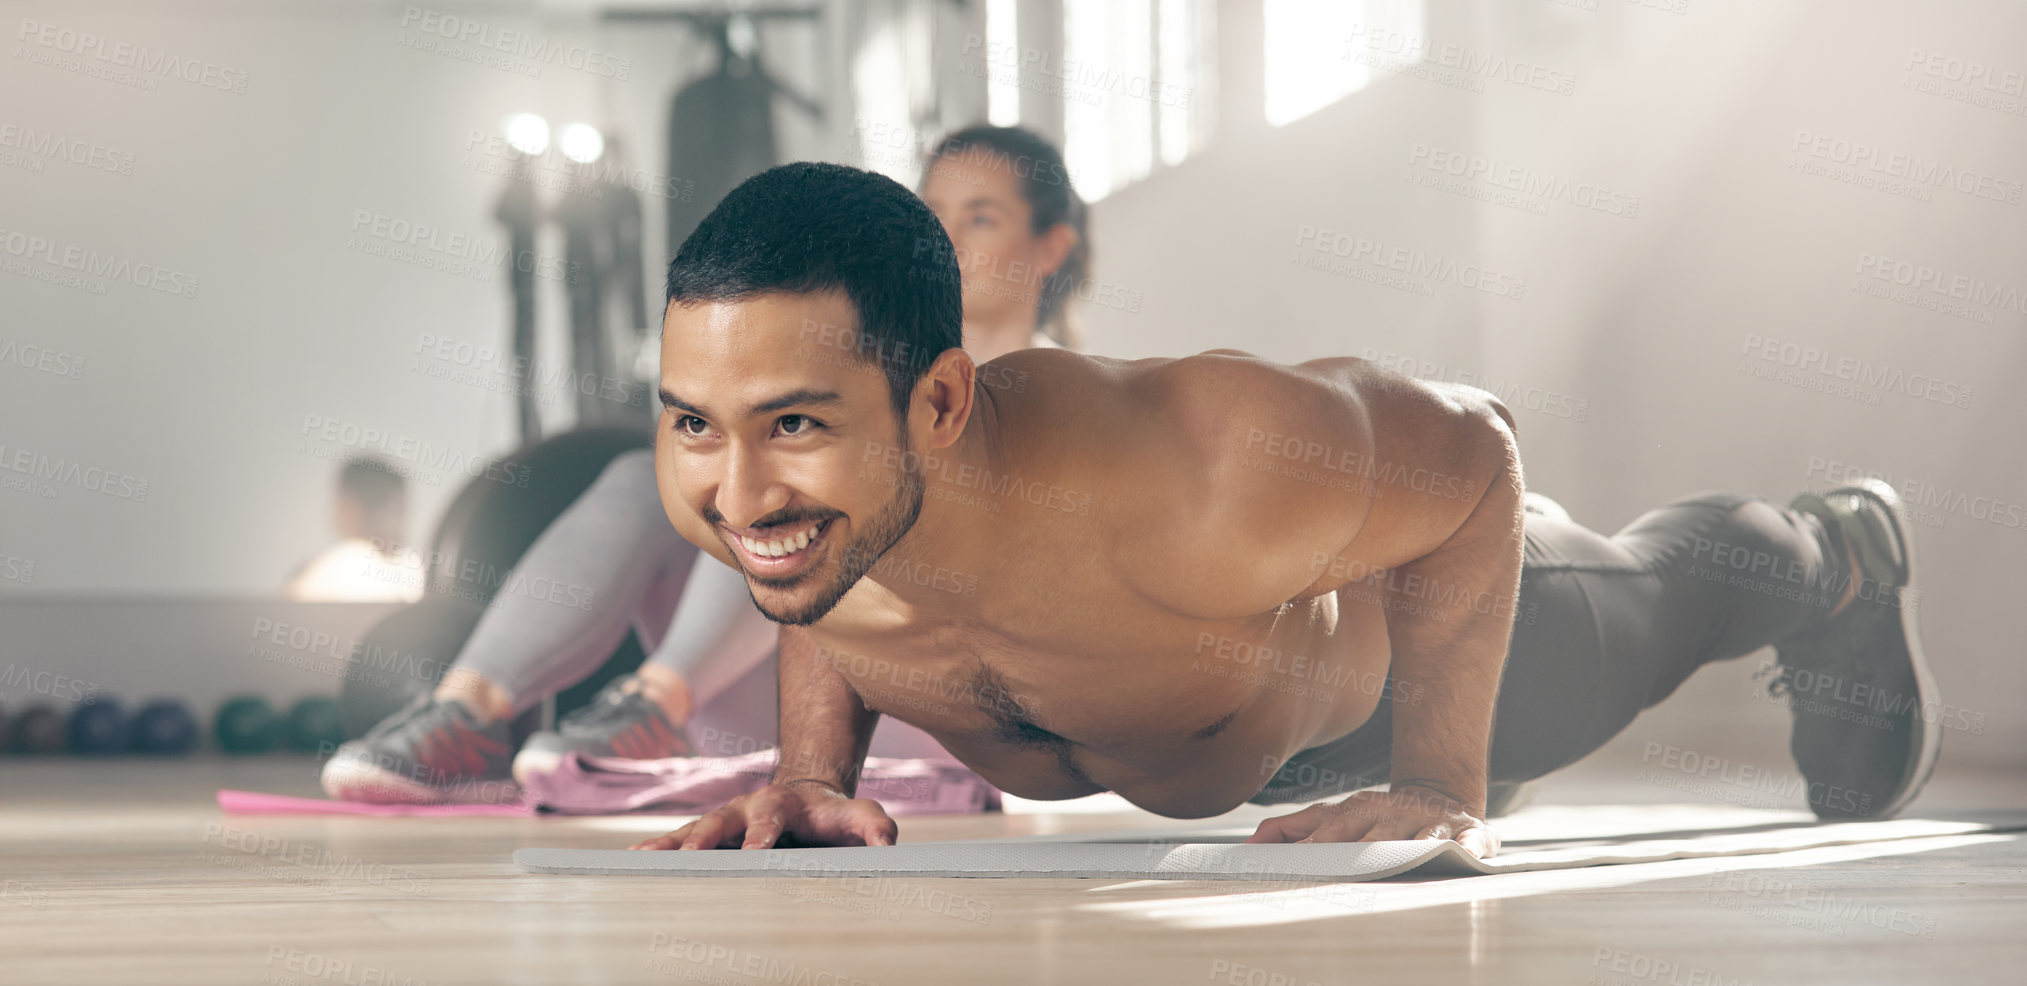 Buy stock photo Shot of a young male athlete working out at the gym